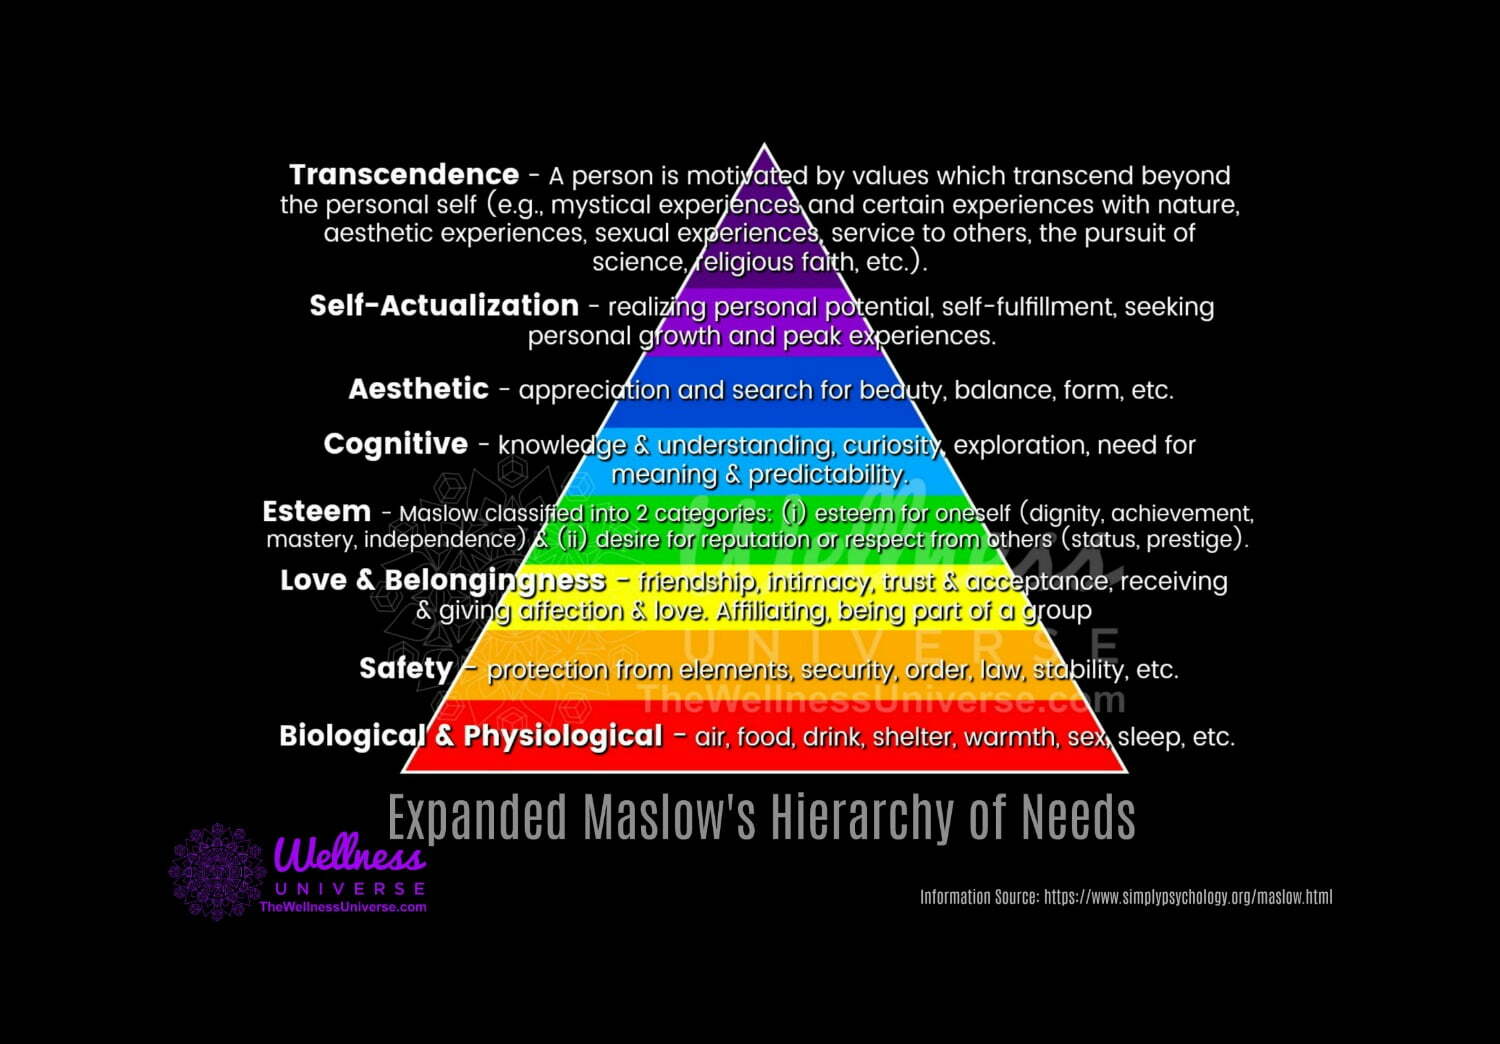 Wellness, Maslow's Hierarchy & The Wellness Universe's Impact